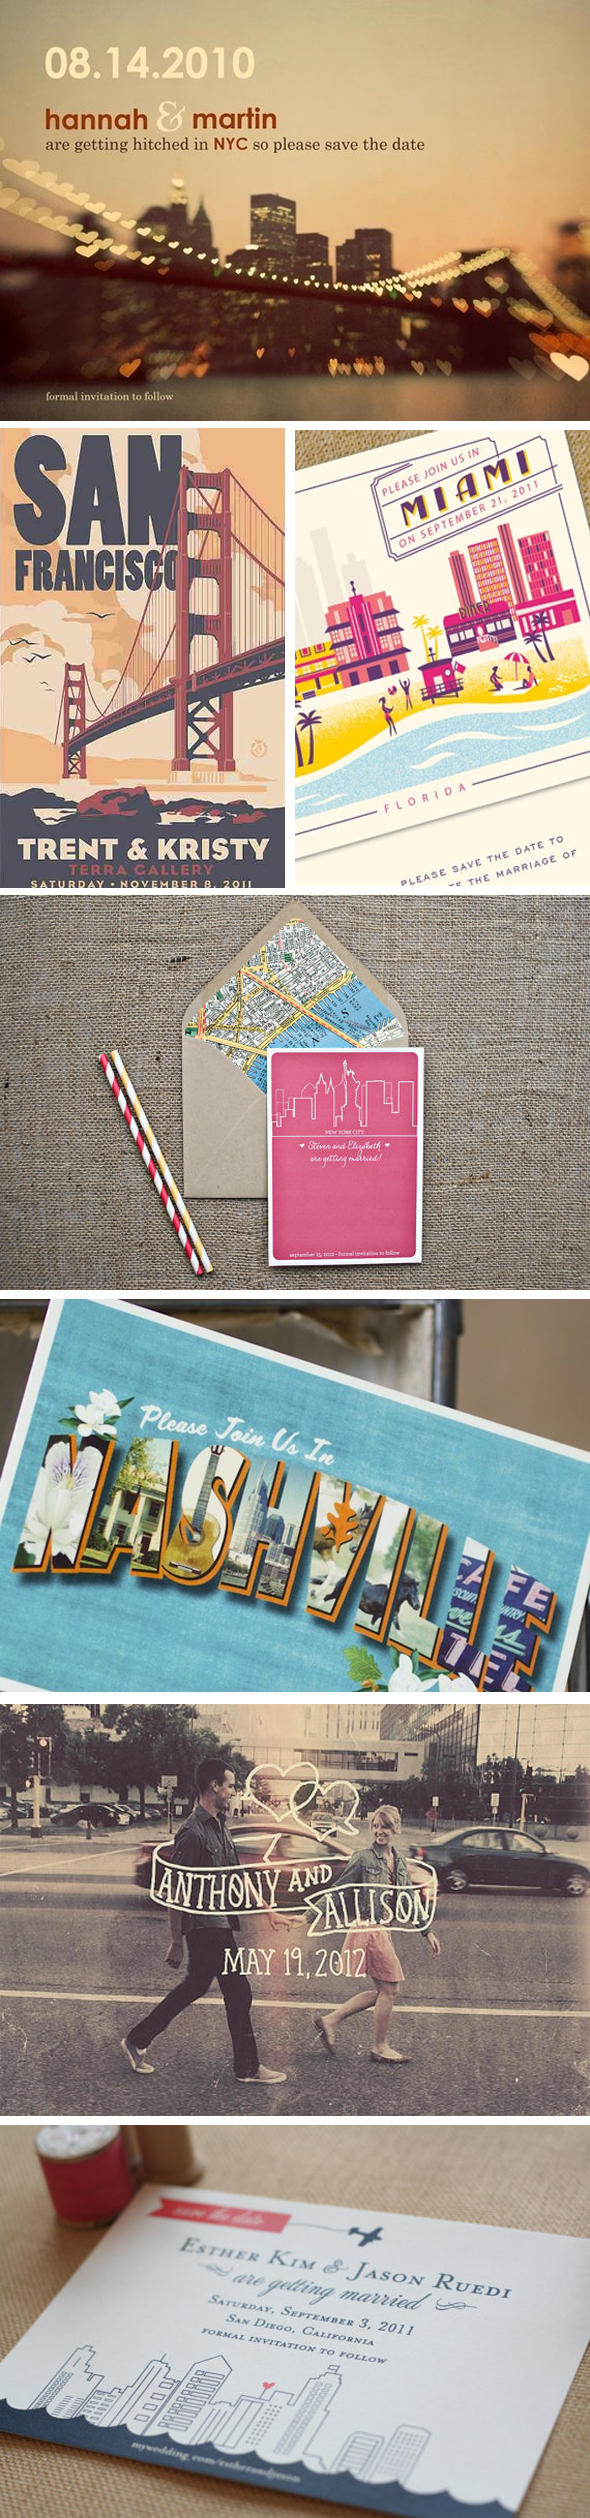 city save the date cards